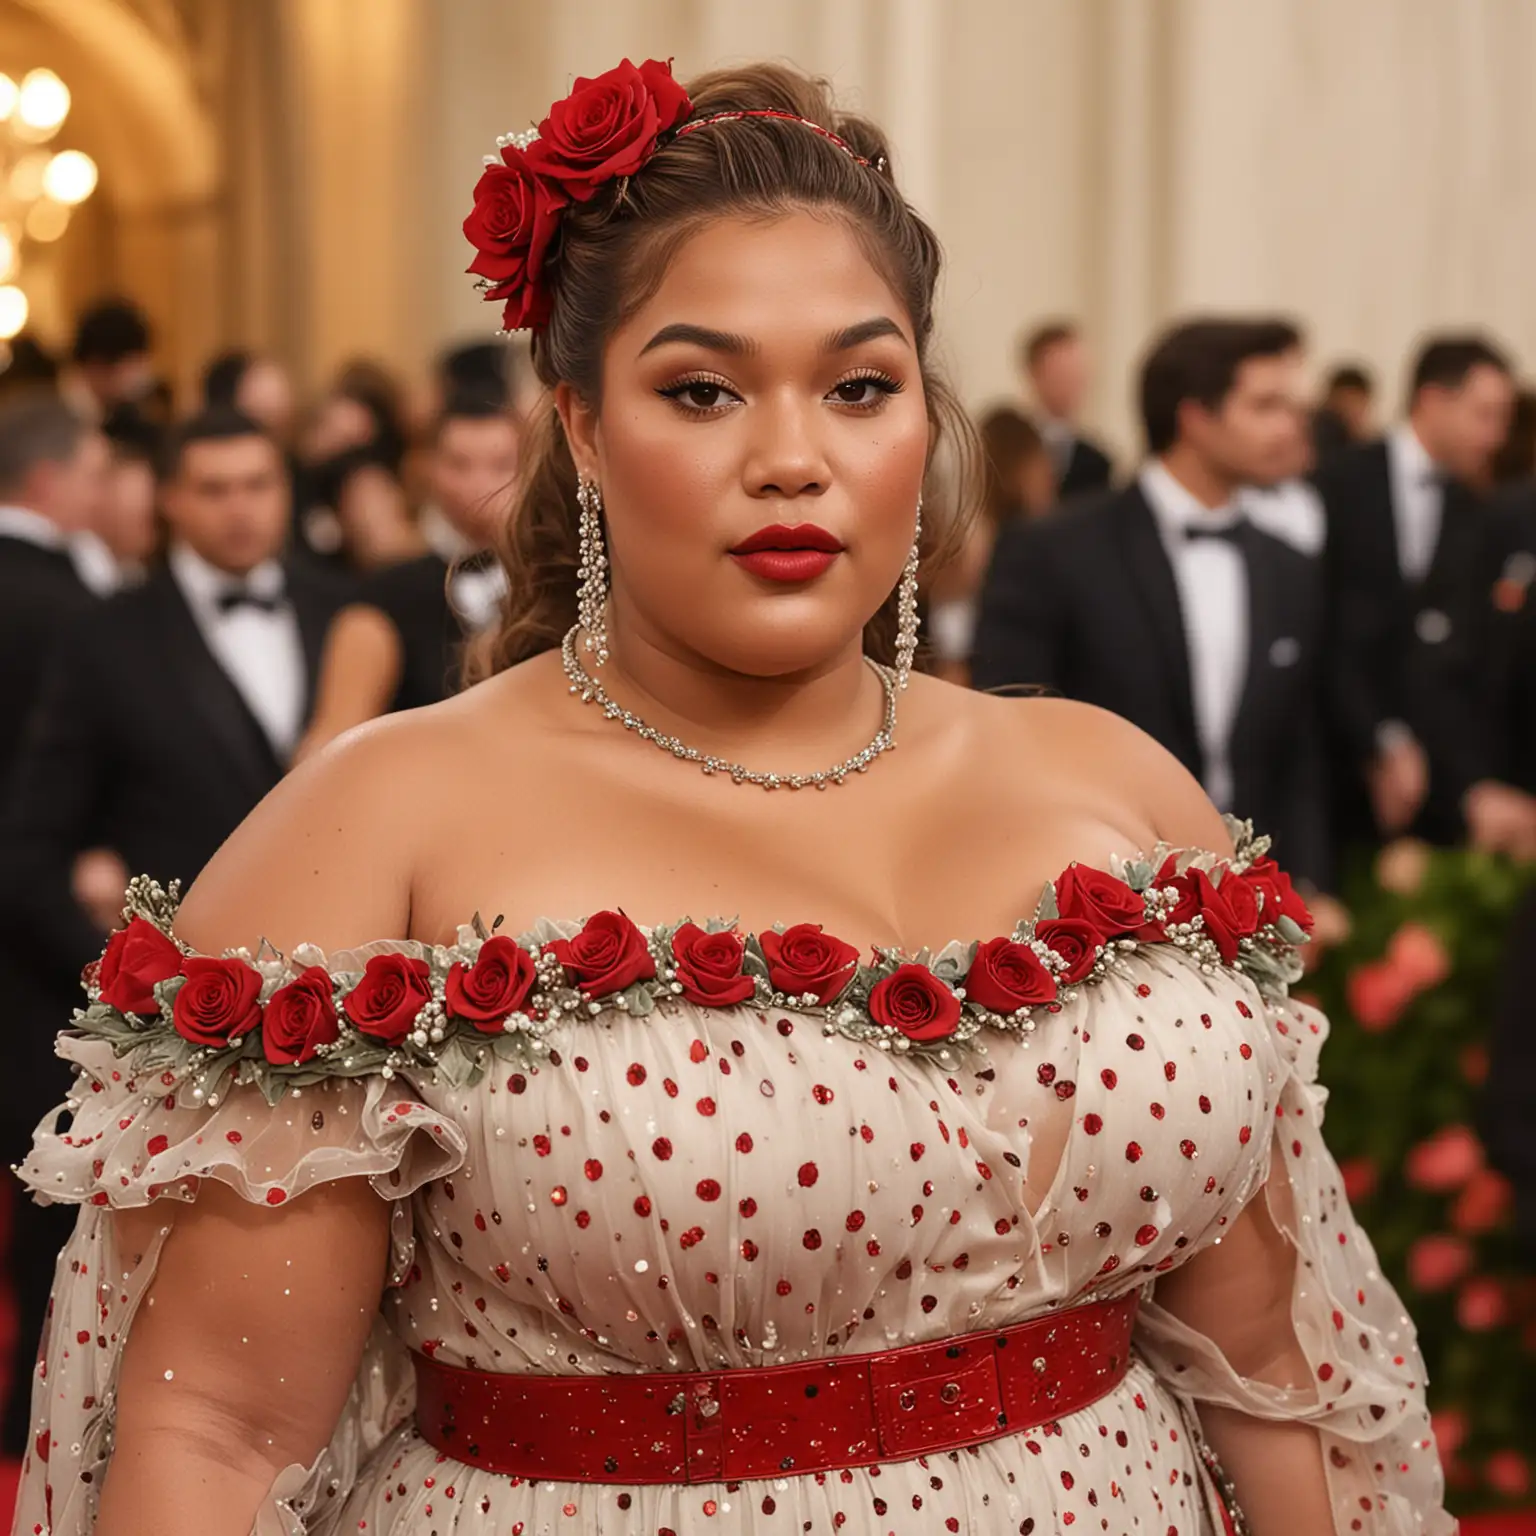 Ethereal PlusSized Woman in PolkaDot Gown at Met Gala